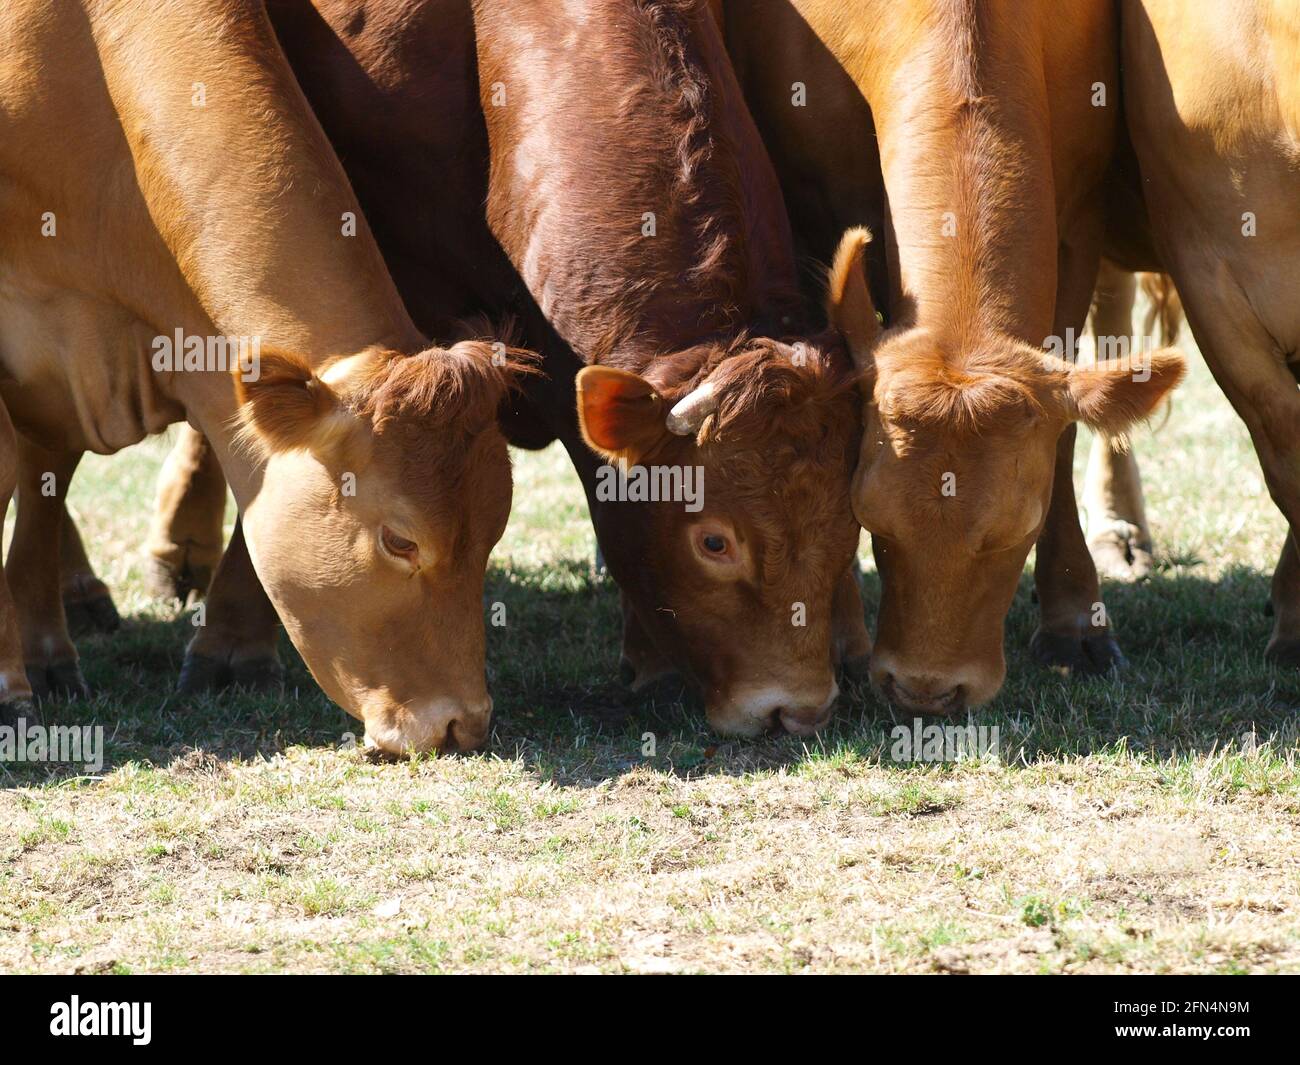 A small herd of cattle grazing in a summer paddock. Stock Photo